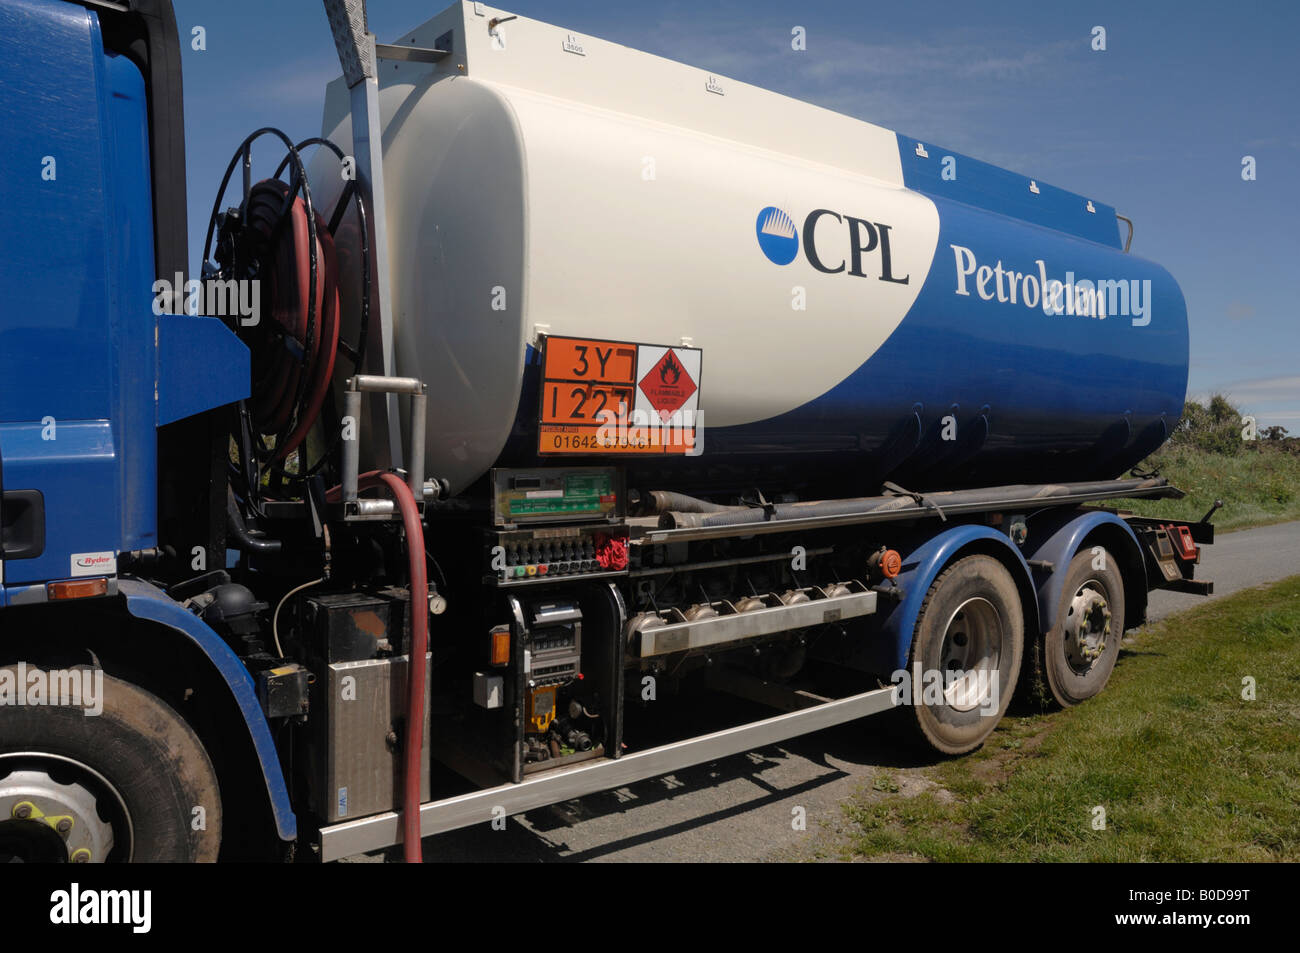 CPL oil road tanker delivering domestic heating oil in rural location Marloes Haverfordwest Wales UK Europe Stock Photo